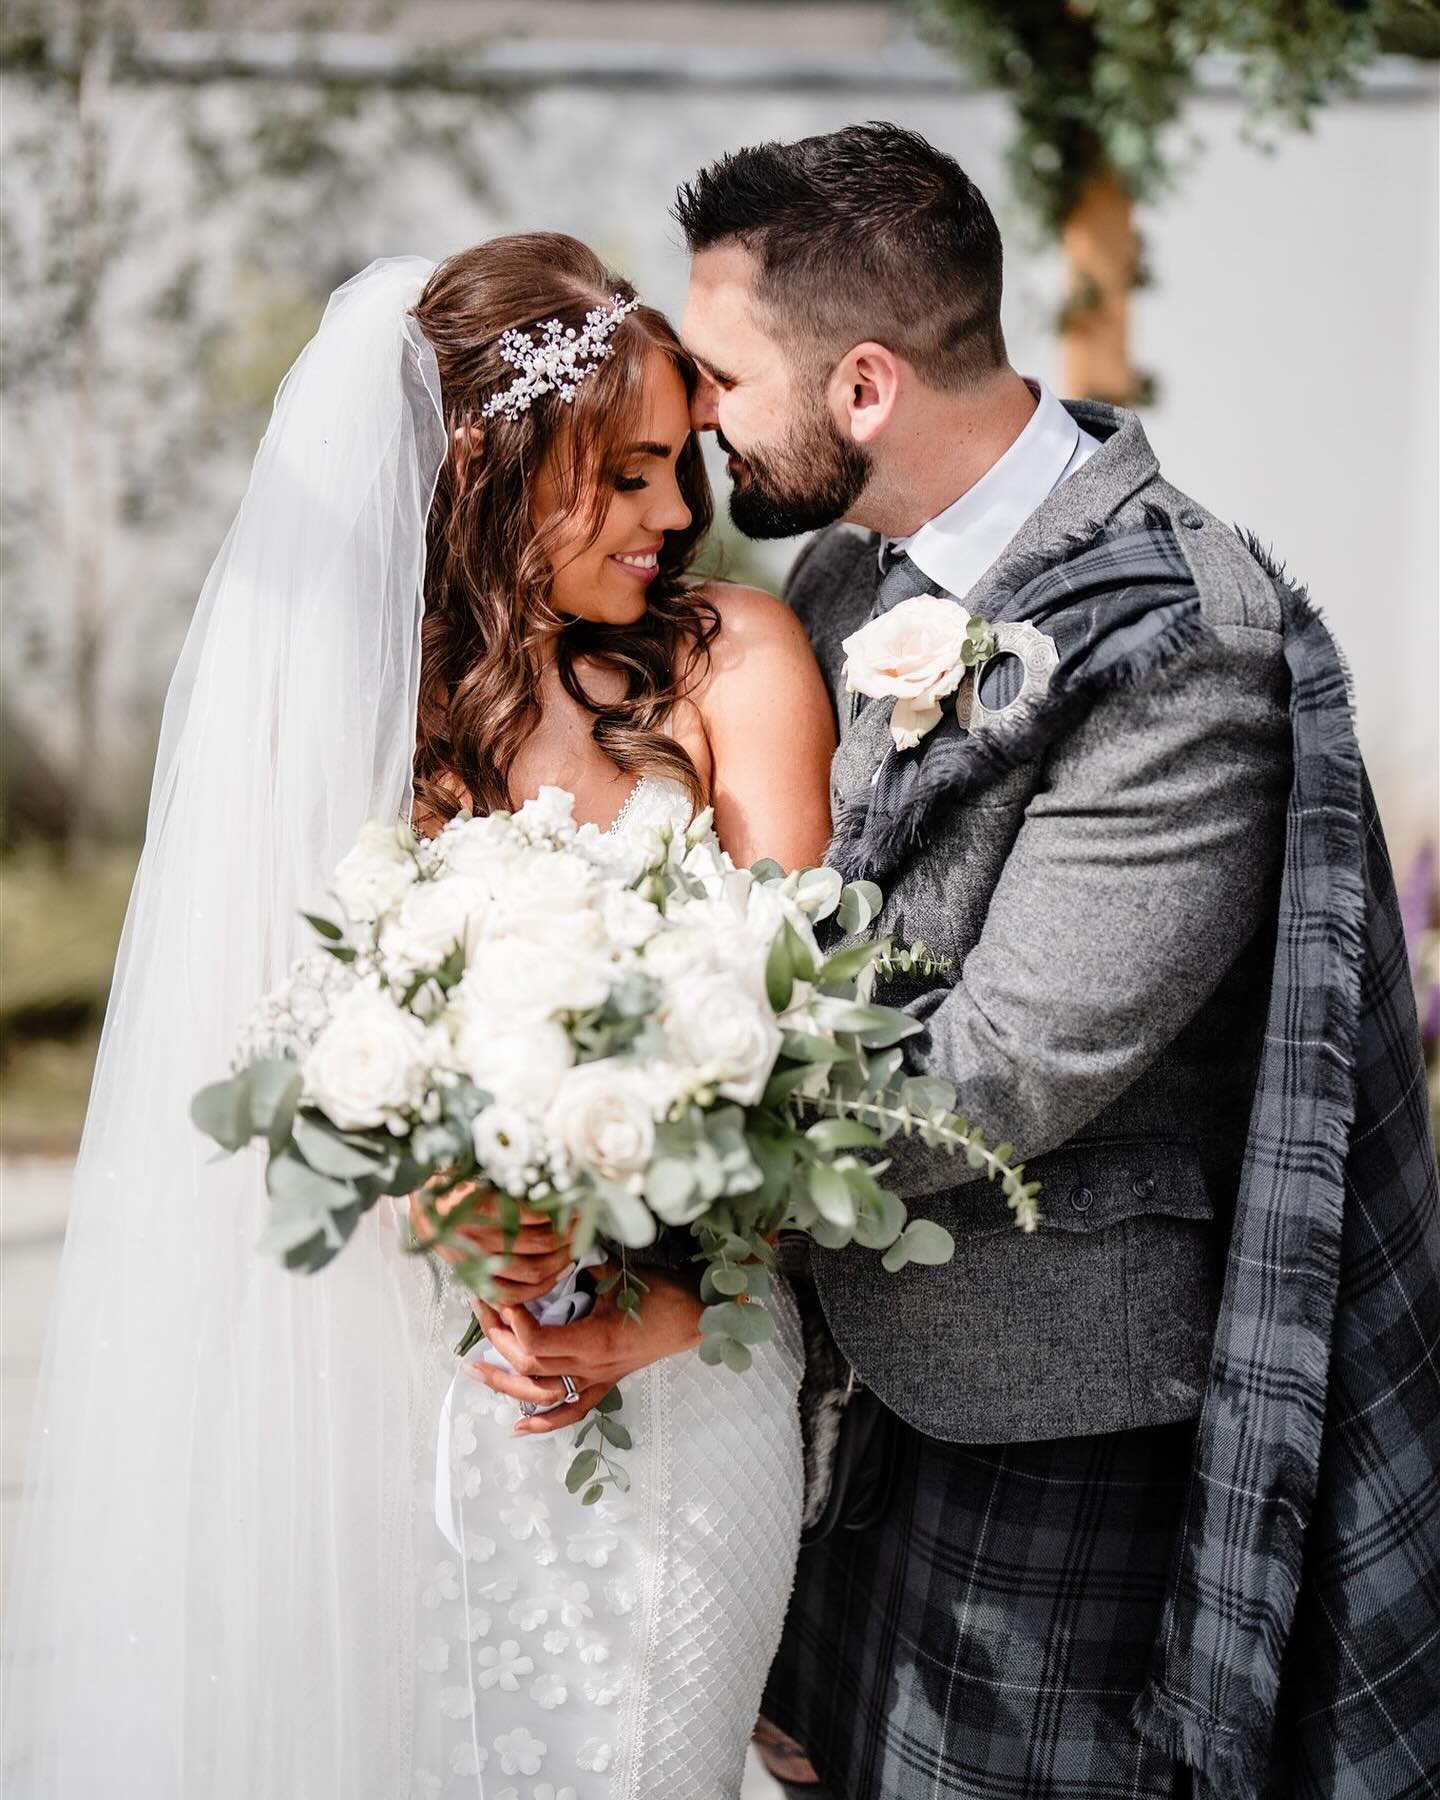 There&rsquo;s just so many beautiful moments from Nikki &amp; Greig&rsquo;s stunning wedding day - I want to share them all! 📸❤️

.
.
.
.
.
.

#glasgowwedding #weddingphotographerglasgow  #groomreaction #firstlook #brideentrance #realscottishwedding